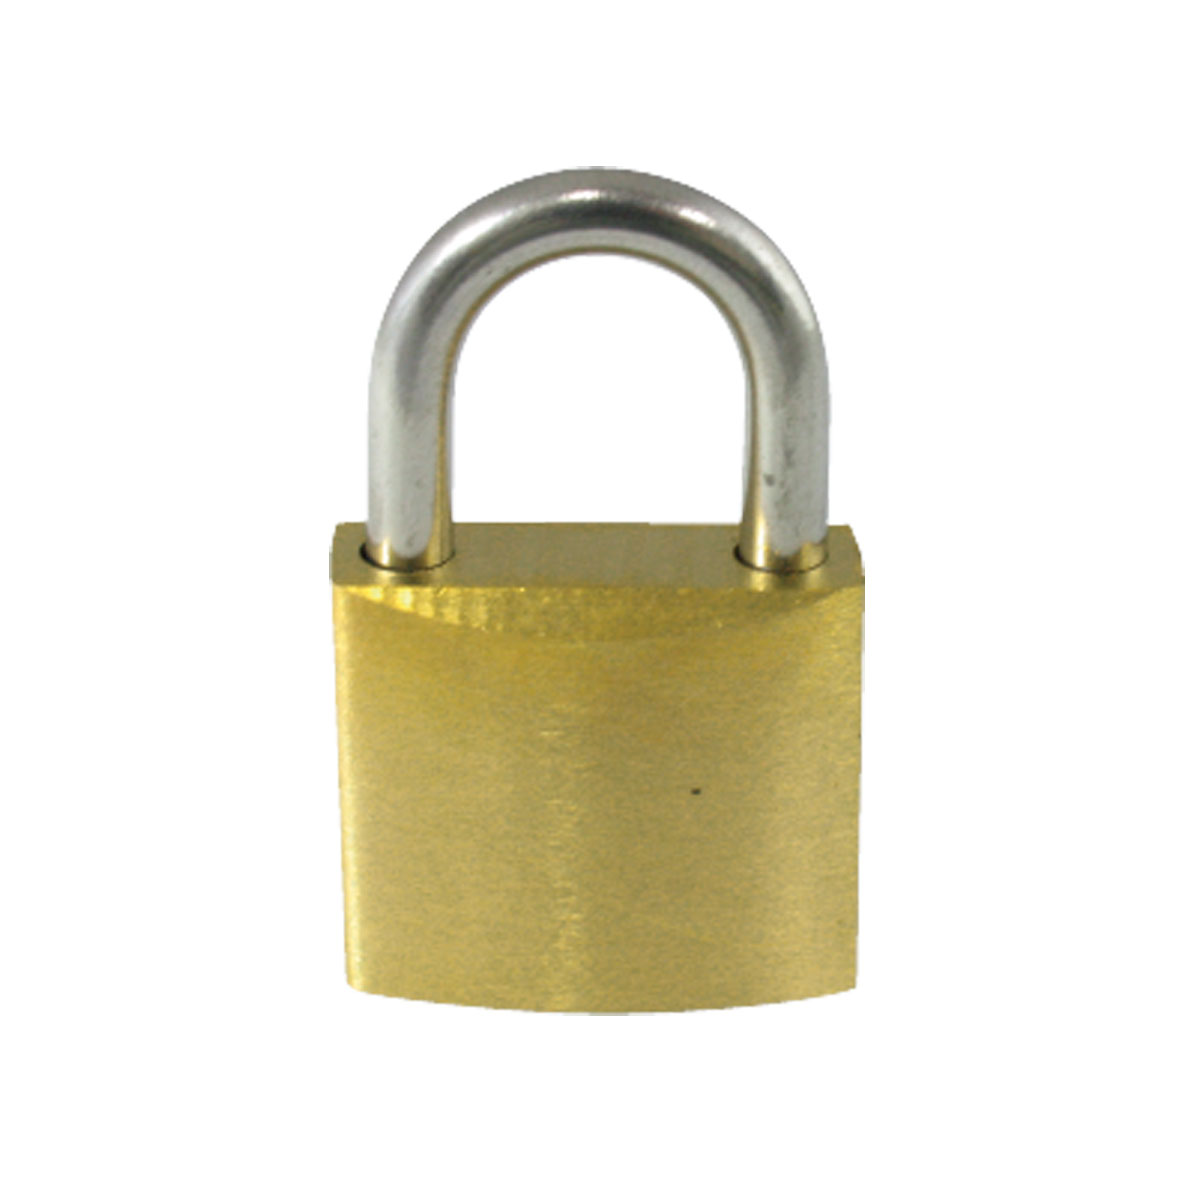 MARINE TOWN PAD LOCK BRASS STAINLESS STEEL SHACKLE 40MM